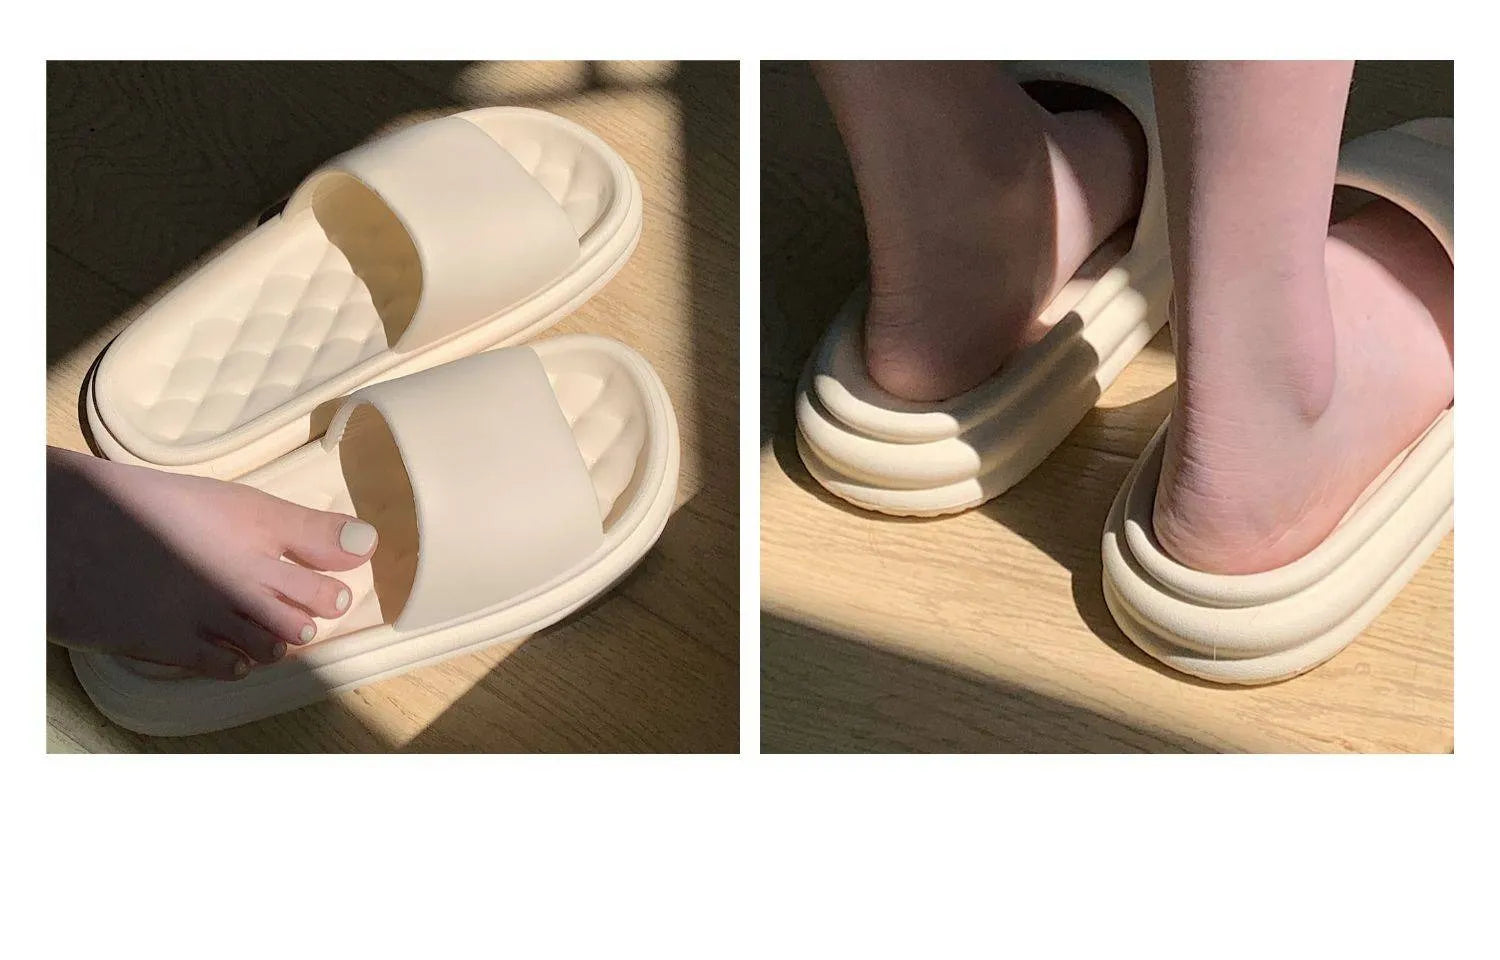 New Fashion Footwear: Step into summer with these trendy off-white flip flops.Lightweight & comfortable for all your summer adventures.Slip on comfort and elevate your casual look with these off-white flips.